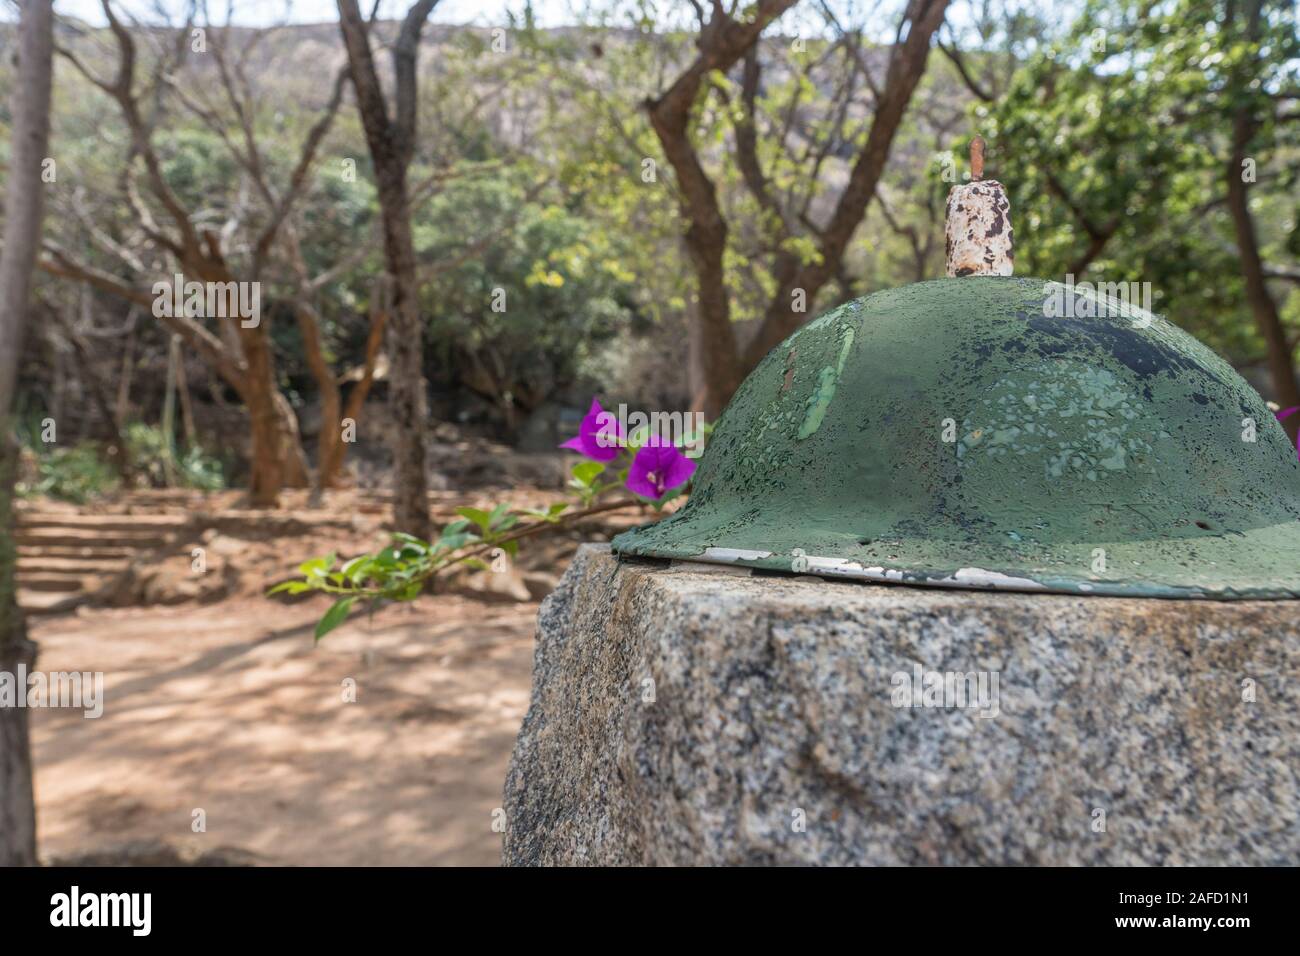 Matobo Hills National Park, Zimbabwe. The Memorable Order of Tin Hats (MOTH) Shrine, a memorial dedicated to the Rhodesians who sacrificed their lives in the first and second world war. Stock Photo